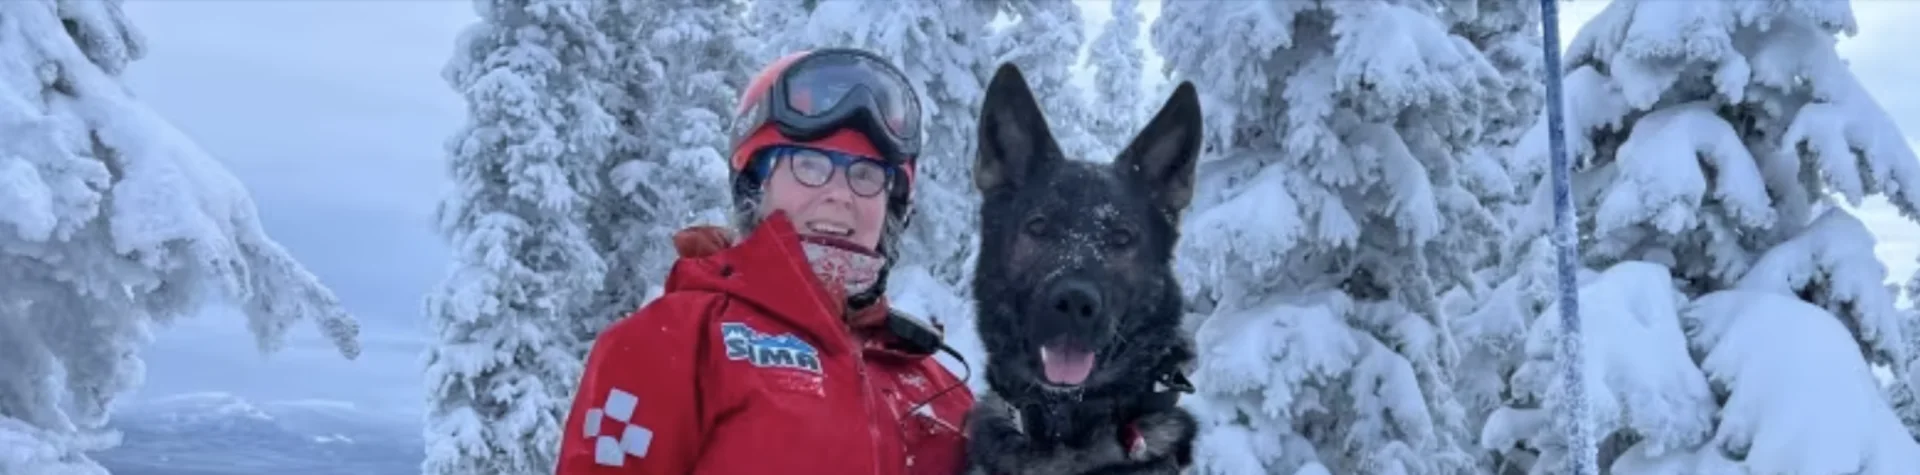 Meet Kipper, the newest — and only — avalanche dog in Canada's North